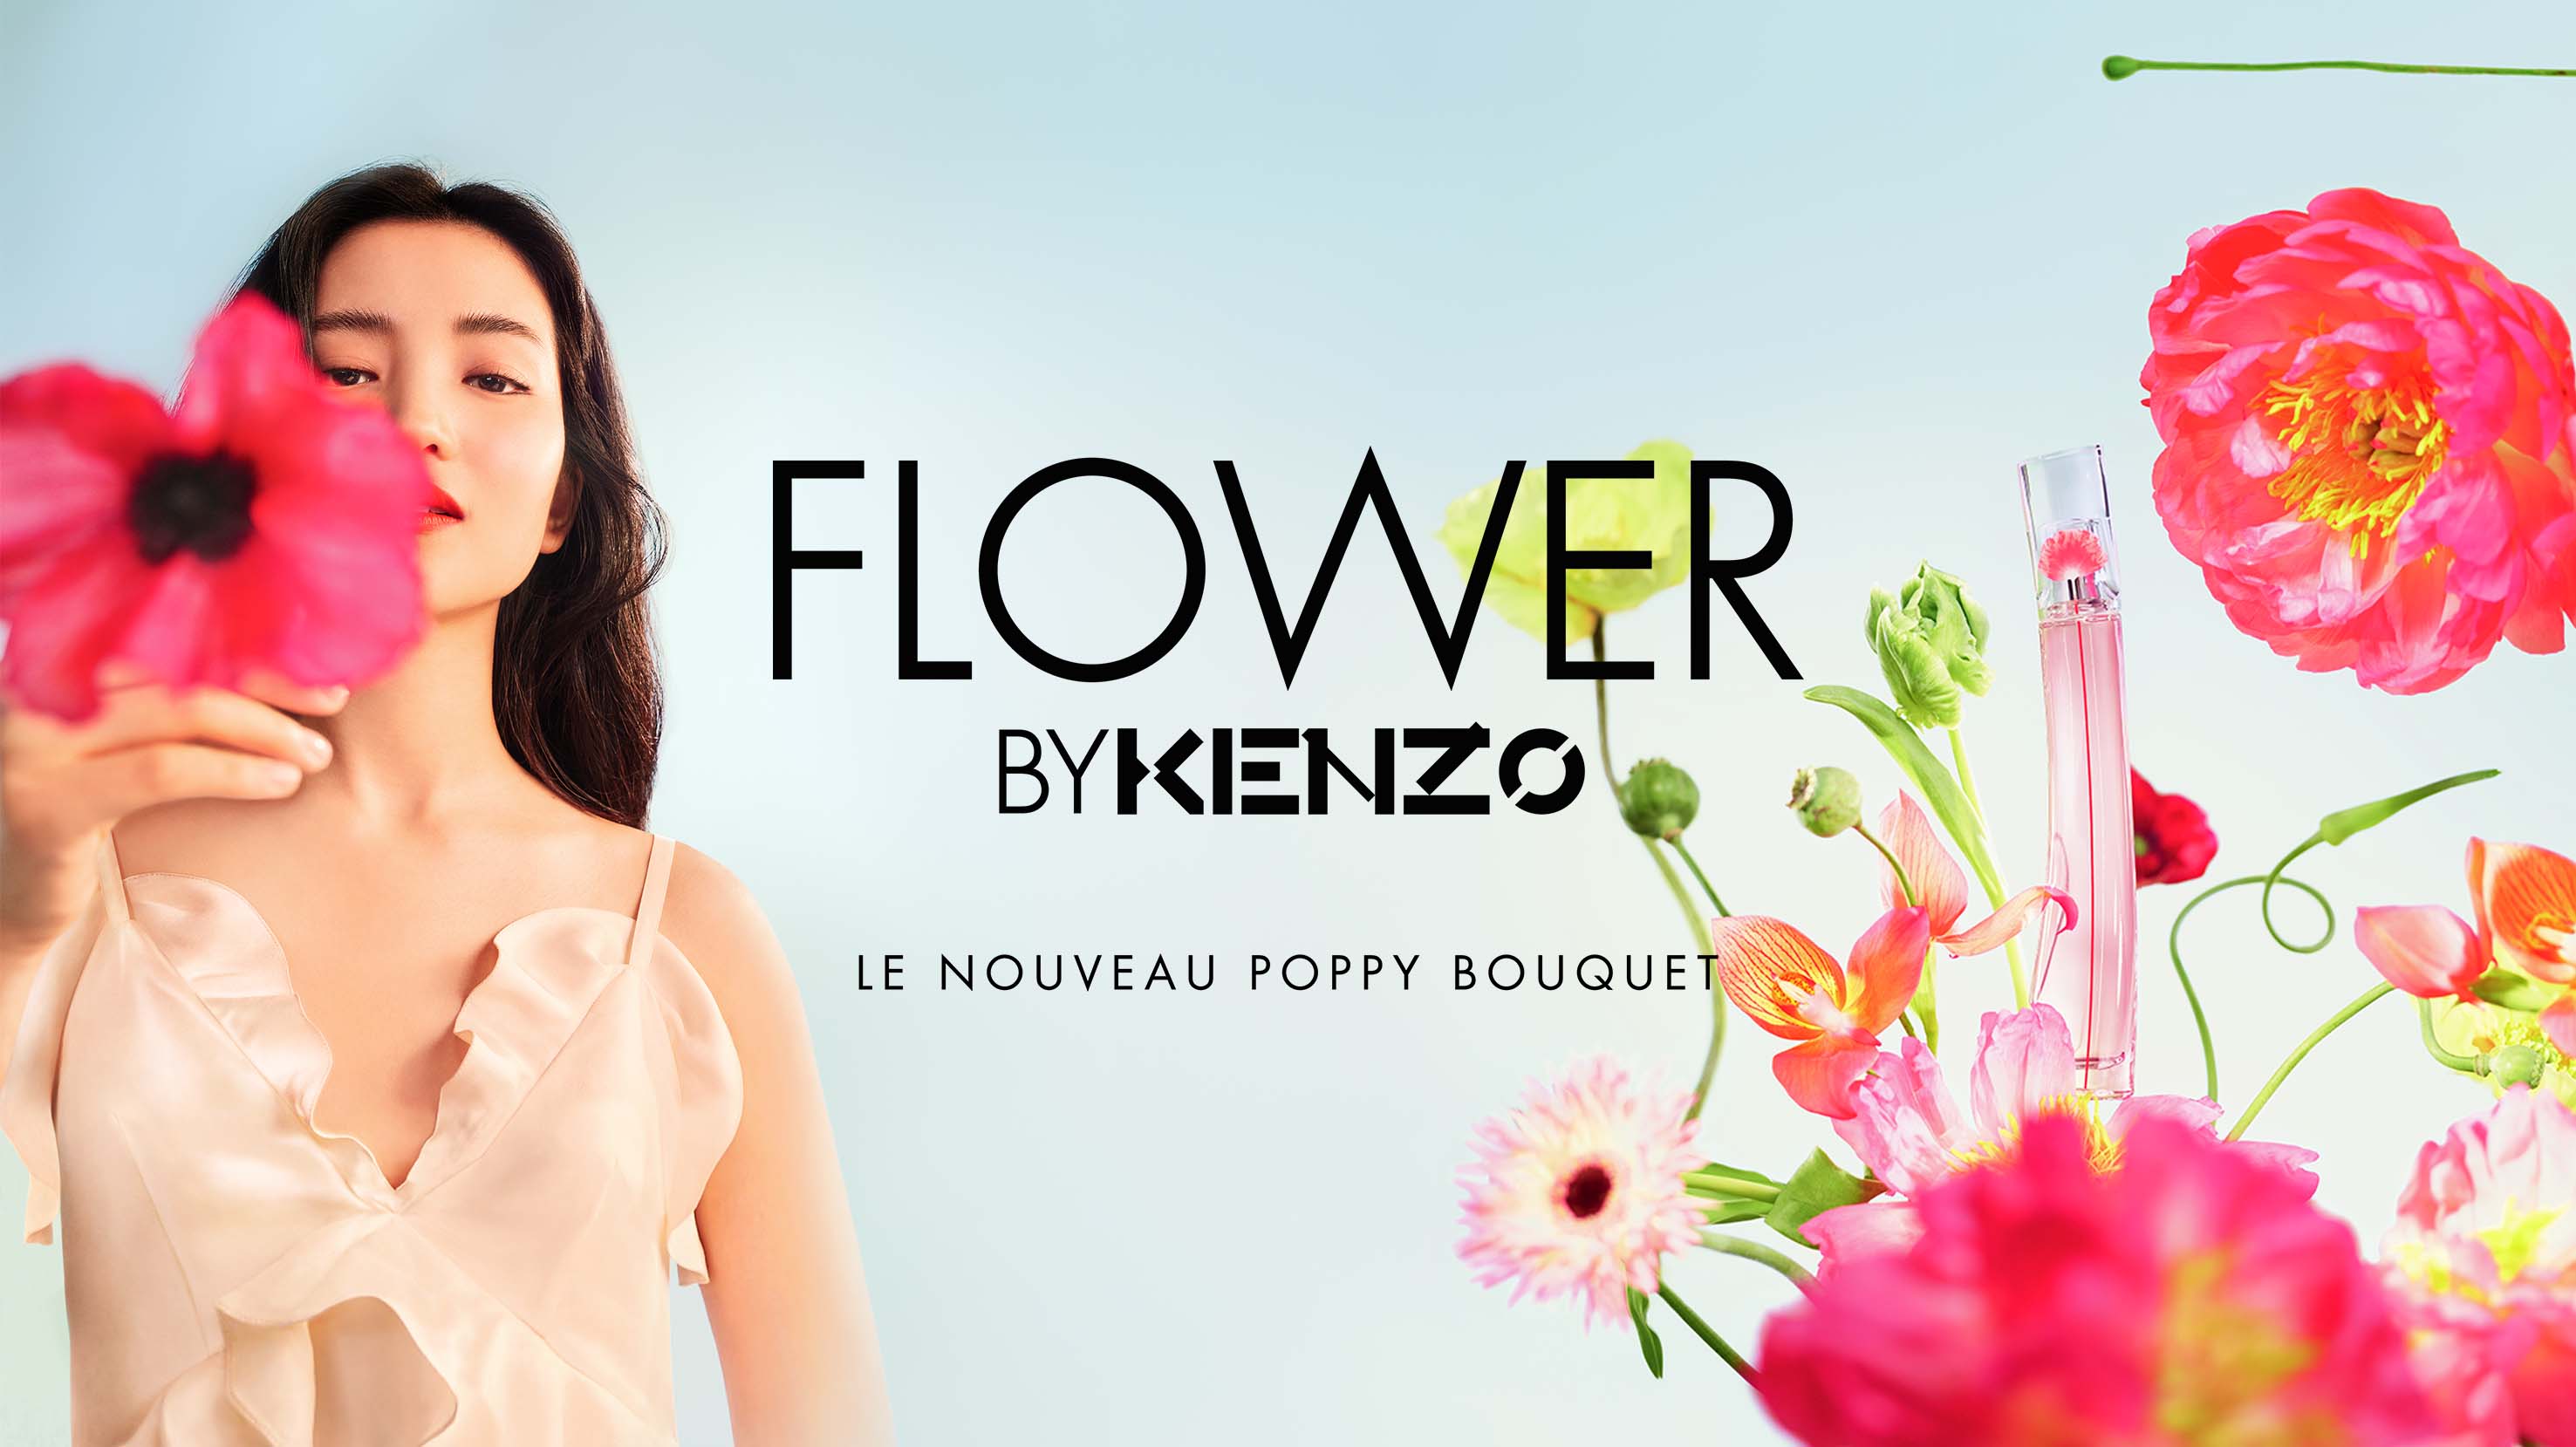 Les parfums FLOWER BY KENZO - Kenzo Parfums